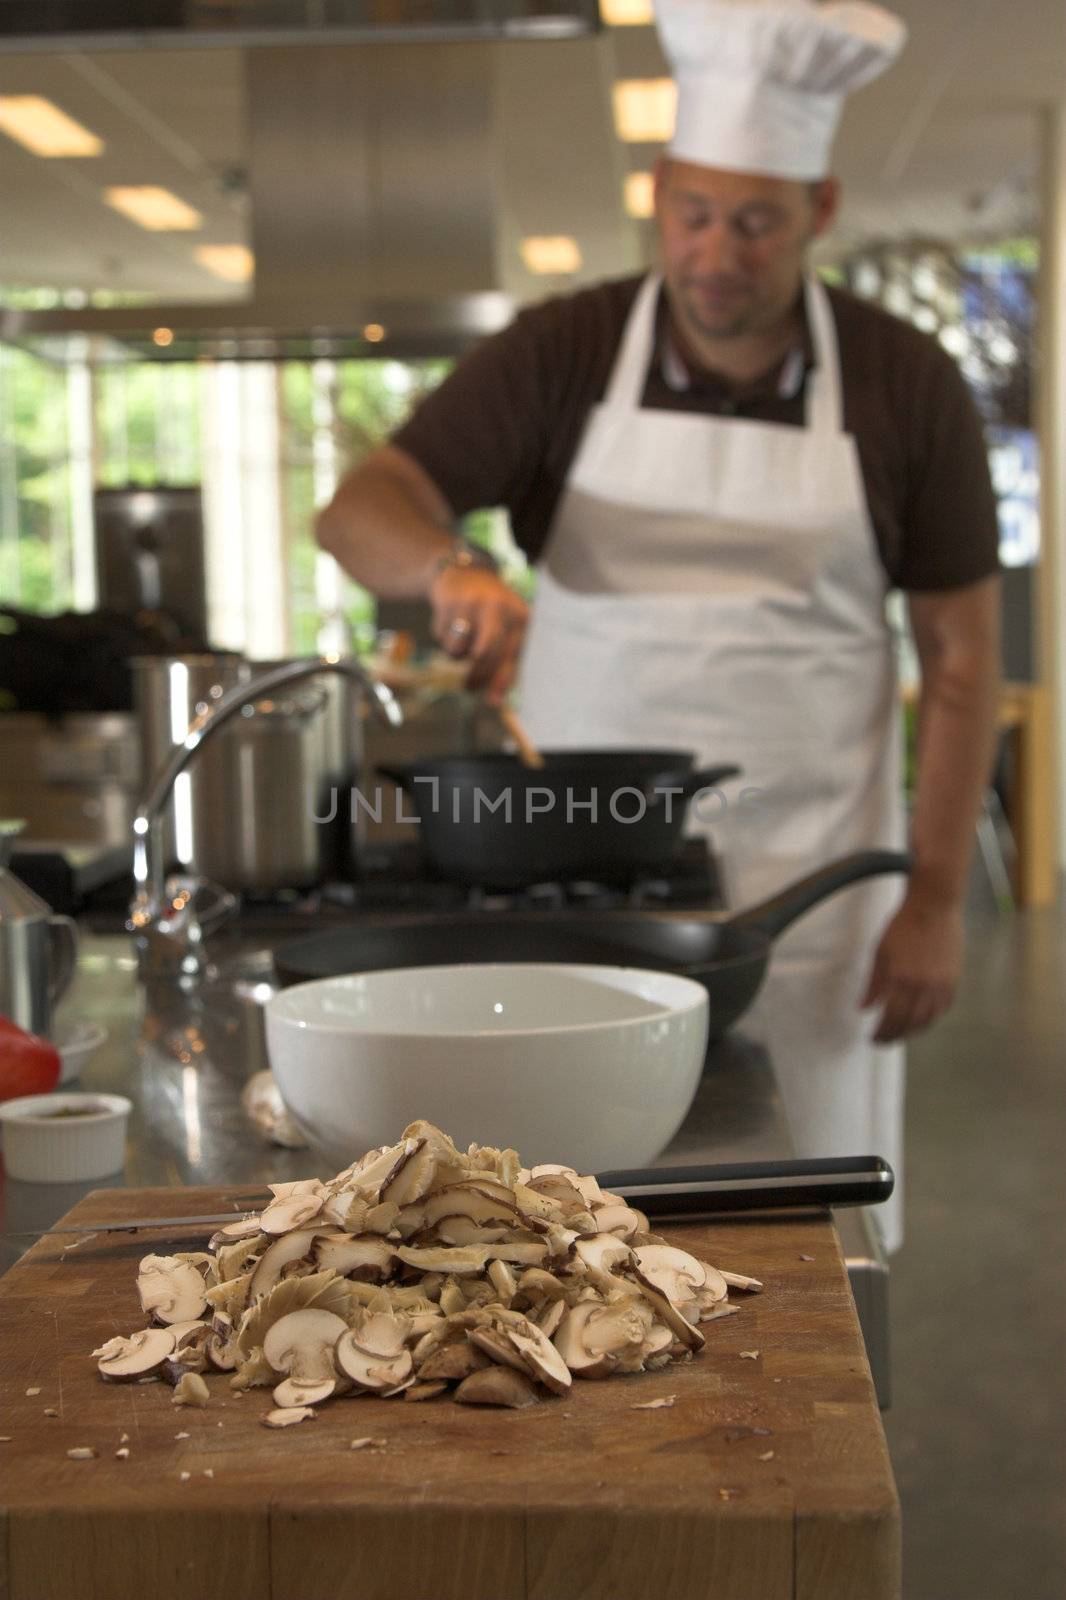 Italian chef stirring the food on the stove (focus is on the mushrooms in the front)